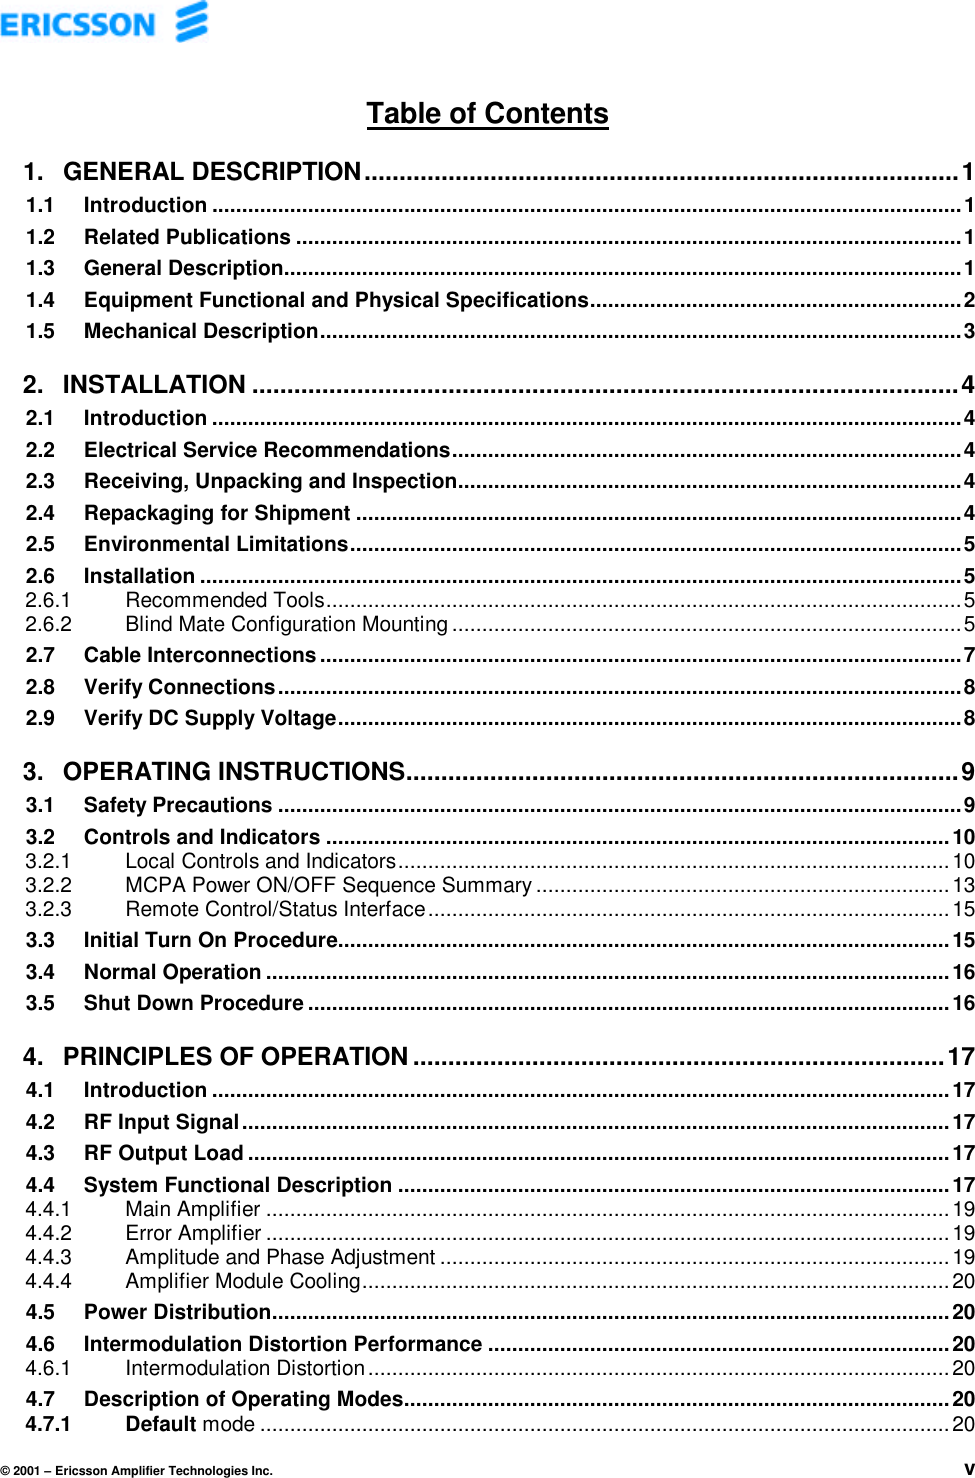 © 2001 – Ericsson Amplifier Technologies Inc. vTable of Contents1. GENERAL DESCRIPTION.....................................................................................11.1 Introduction .............................................................................................................................11.2 Related Publications ...............................................................................................................11.3 General Description.................................................................................................................11.4 Equipment Functional and Physical Specifications..............................................................21.5 Mechanical Description...........................................................................................................32. INSTALLATION .....................................................................................................42.1 Introduction .............................................................................................................................42.2 Electrical Service Recommendations.....................................................................................42.3 Receiving, Unpacking and Inspection....................................................................................42.4 Repackaging for Shipment .....................................................................................................42.5 Environmental Limitations......................................................................................................52.6 Installation ...............................................................................................................................52.6.1 Recommended Tools..........................................................................................................52.6.2 Blind Mate Configuration Mounting .....................................................................................52.7 Cable Interconnections ...........................................................................................................72.8 Verify Connections..................................................................................................................82.9 Verify DC Supply Voltage........................................................................................................83. OPERATING INSTRUCTIONS...............................................................................93.1 Safety Precautions ..................................................................................................................93.2 Controls and Indicators ........................................................................................................103.2.1 Local Controls and Indicators............................................................................................103.2.2 MCPA Power ON/OFF Sequence Summary .....................................................................133.2.3 Remote Control/Status Interface.......................................................................................153.3 Initial Turn On Procedure......................................................................................................153.4 Normal Operation ..................................................................................................................163.5 Shut Down Procedure ...........................................................................................................164. PRINCIPLES OF OPERATION ............................................................................174.1 Introduction ...........................................................................................................................174.2 RF Input Signal......................................................................................................................174.3 RF Output Load .....................................................................................................................174.4 System Functional Description ............................................................................................174.4.1 Main Amplifier ..................................................................................................................194.4.2 Error Amplifier ..................................................................................................................194.4.3 Amplitude and Phase Adjustment .....................................................................................194.4.4 Amplifier Module Cooling..................................................................................................204.5 Power Distribution.................................................................................................................204.6 Intermodulation Distortion Performance .............................................................................204.6.1 Intermodulation Distortion.................................................................................................204.7 Description of Operating Modes...........................................................................................204.7.1 Default mode ...................................................................................................................20